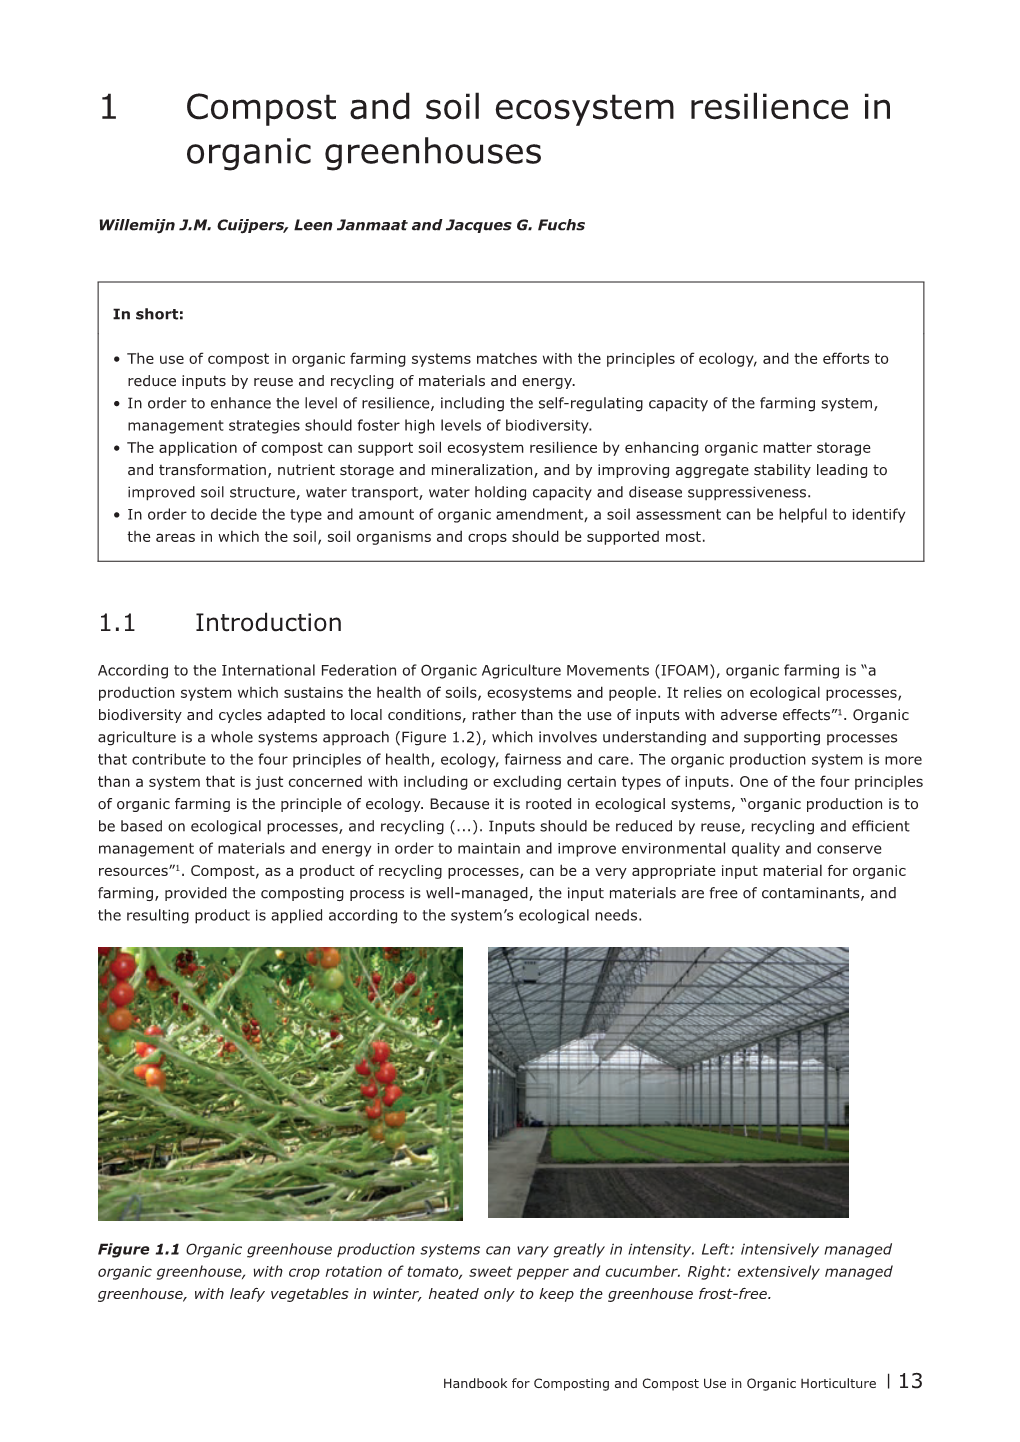 1 Compost and Soil Ecosystem Resilience in Organic Greenhouses